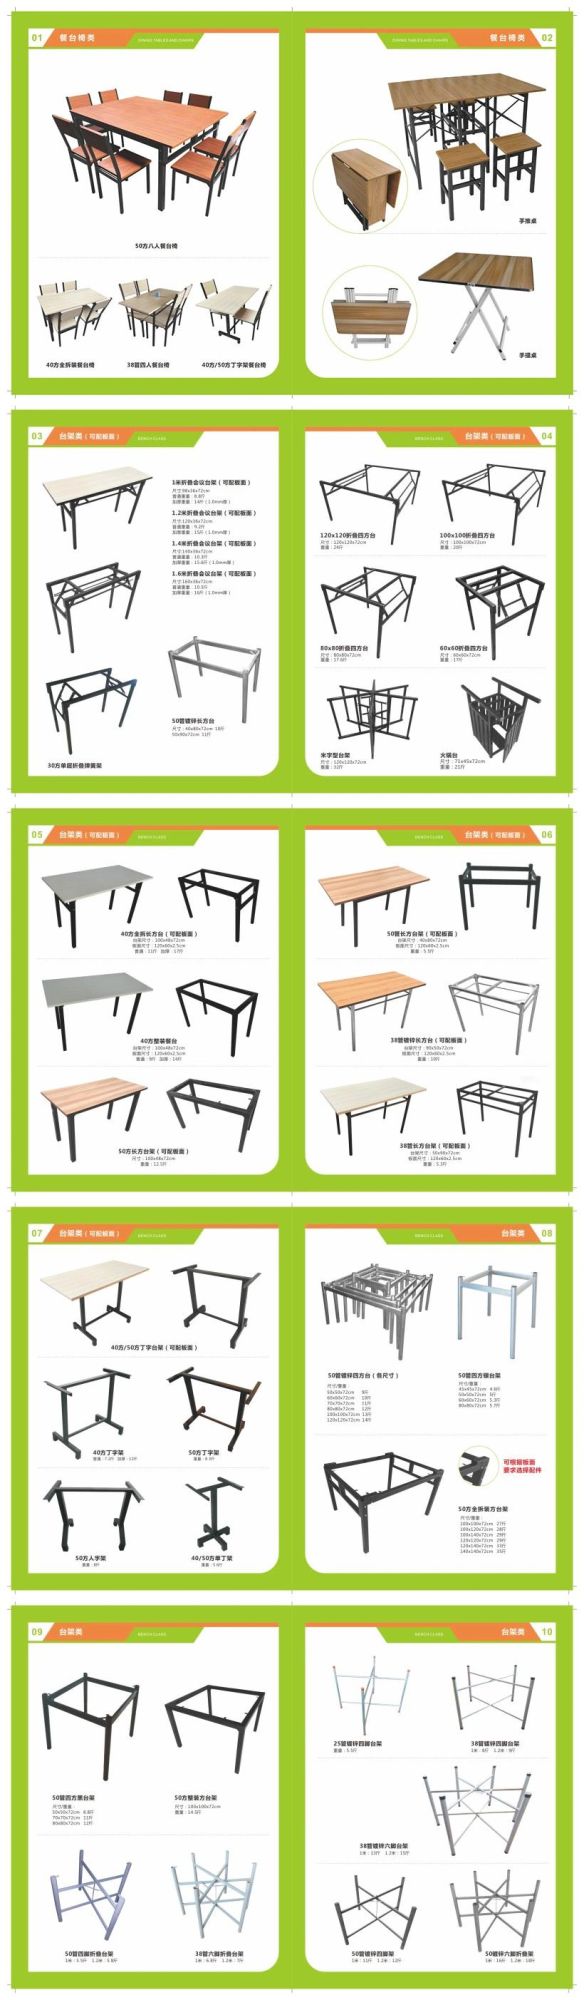 Wholesale 50 Square Tube 8 Seater Restaurant Dining Chair Table Set Cheap Fast Food Canteen Design with Tempered Glass